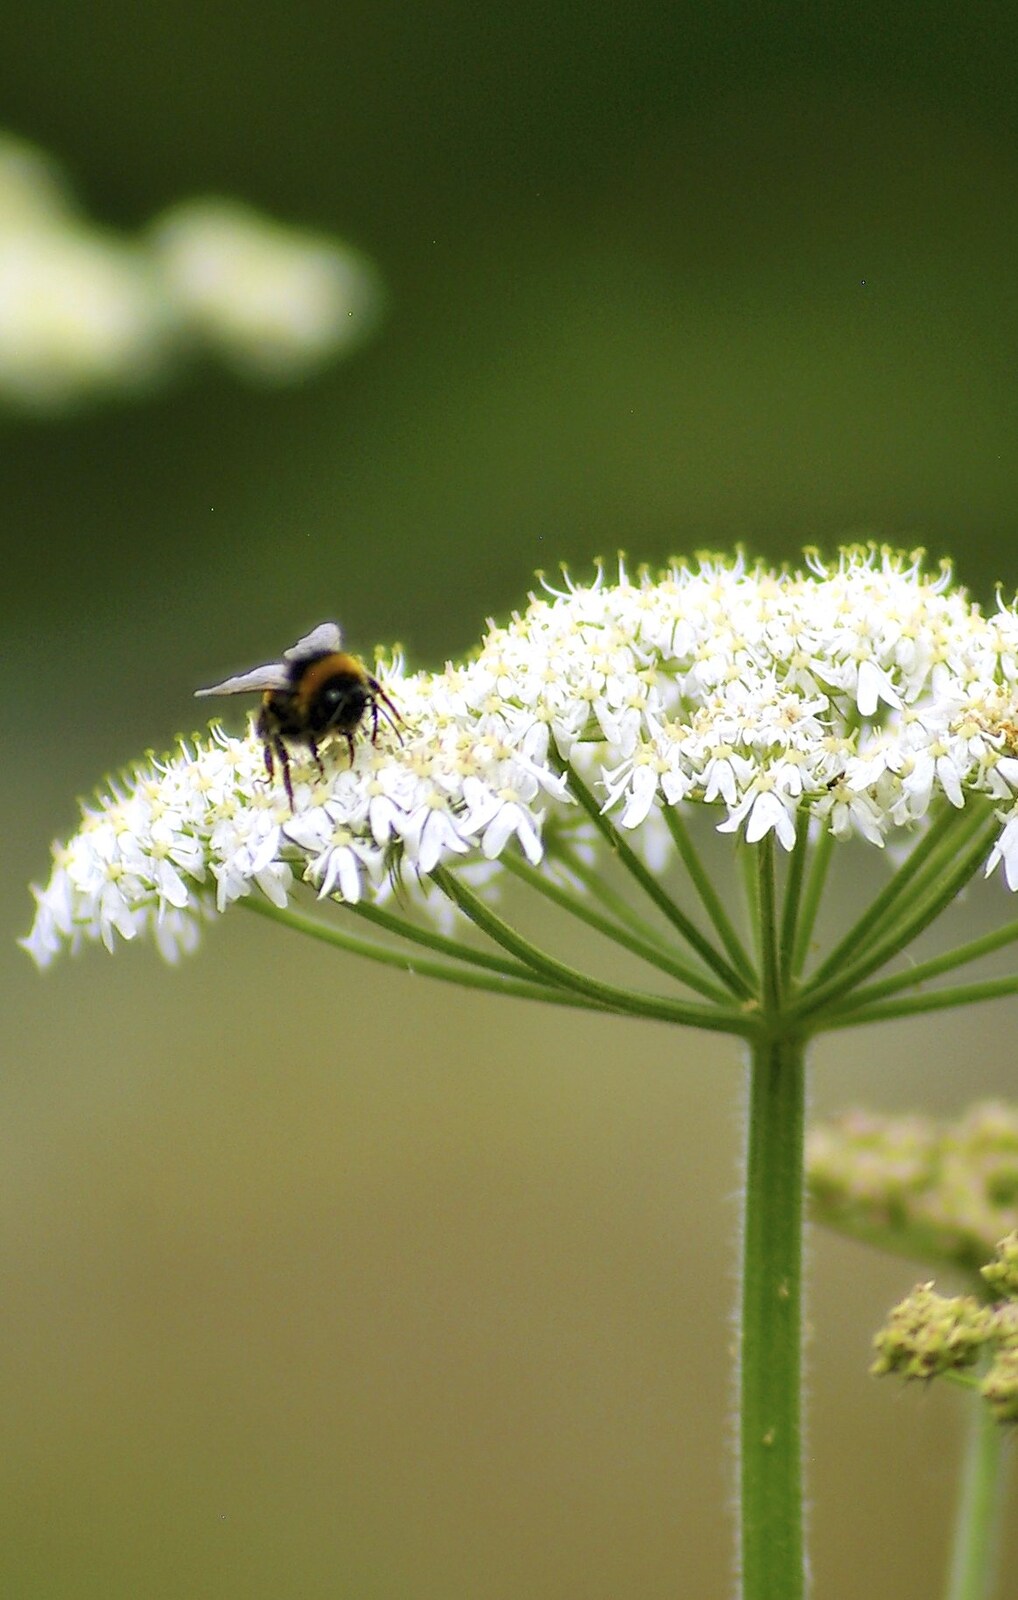 A bumble-bee lights upon a head of Cow Parsley from A French Market Visits, Diss, Norfolk - 24th June 2006